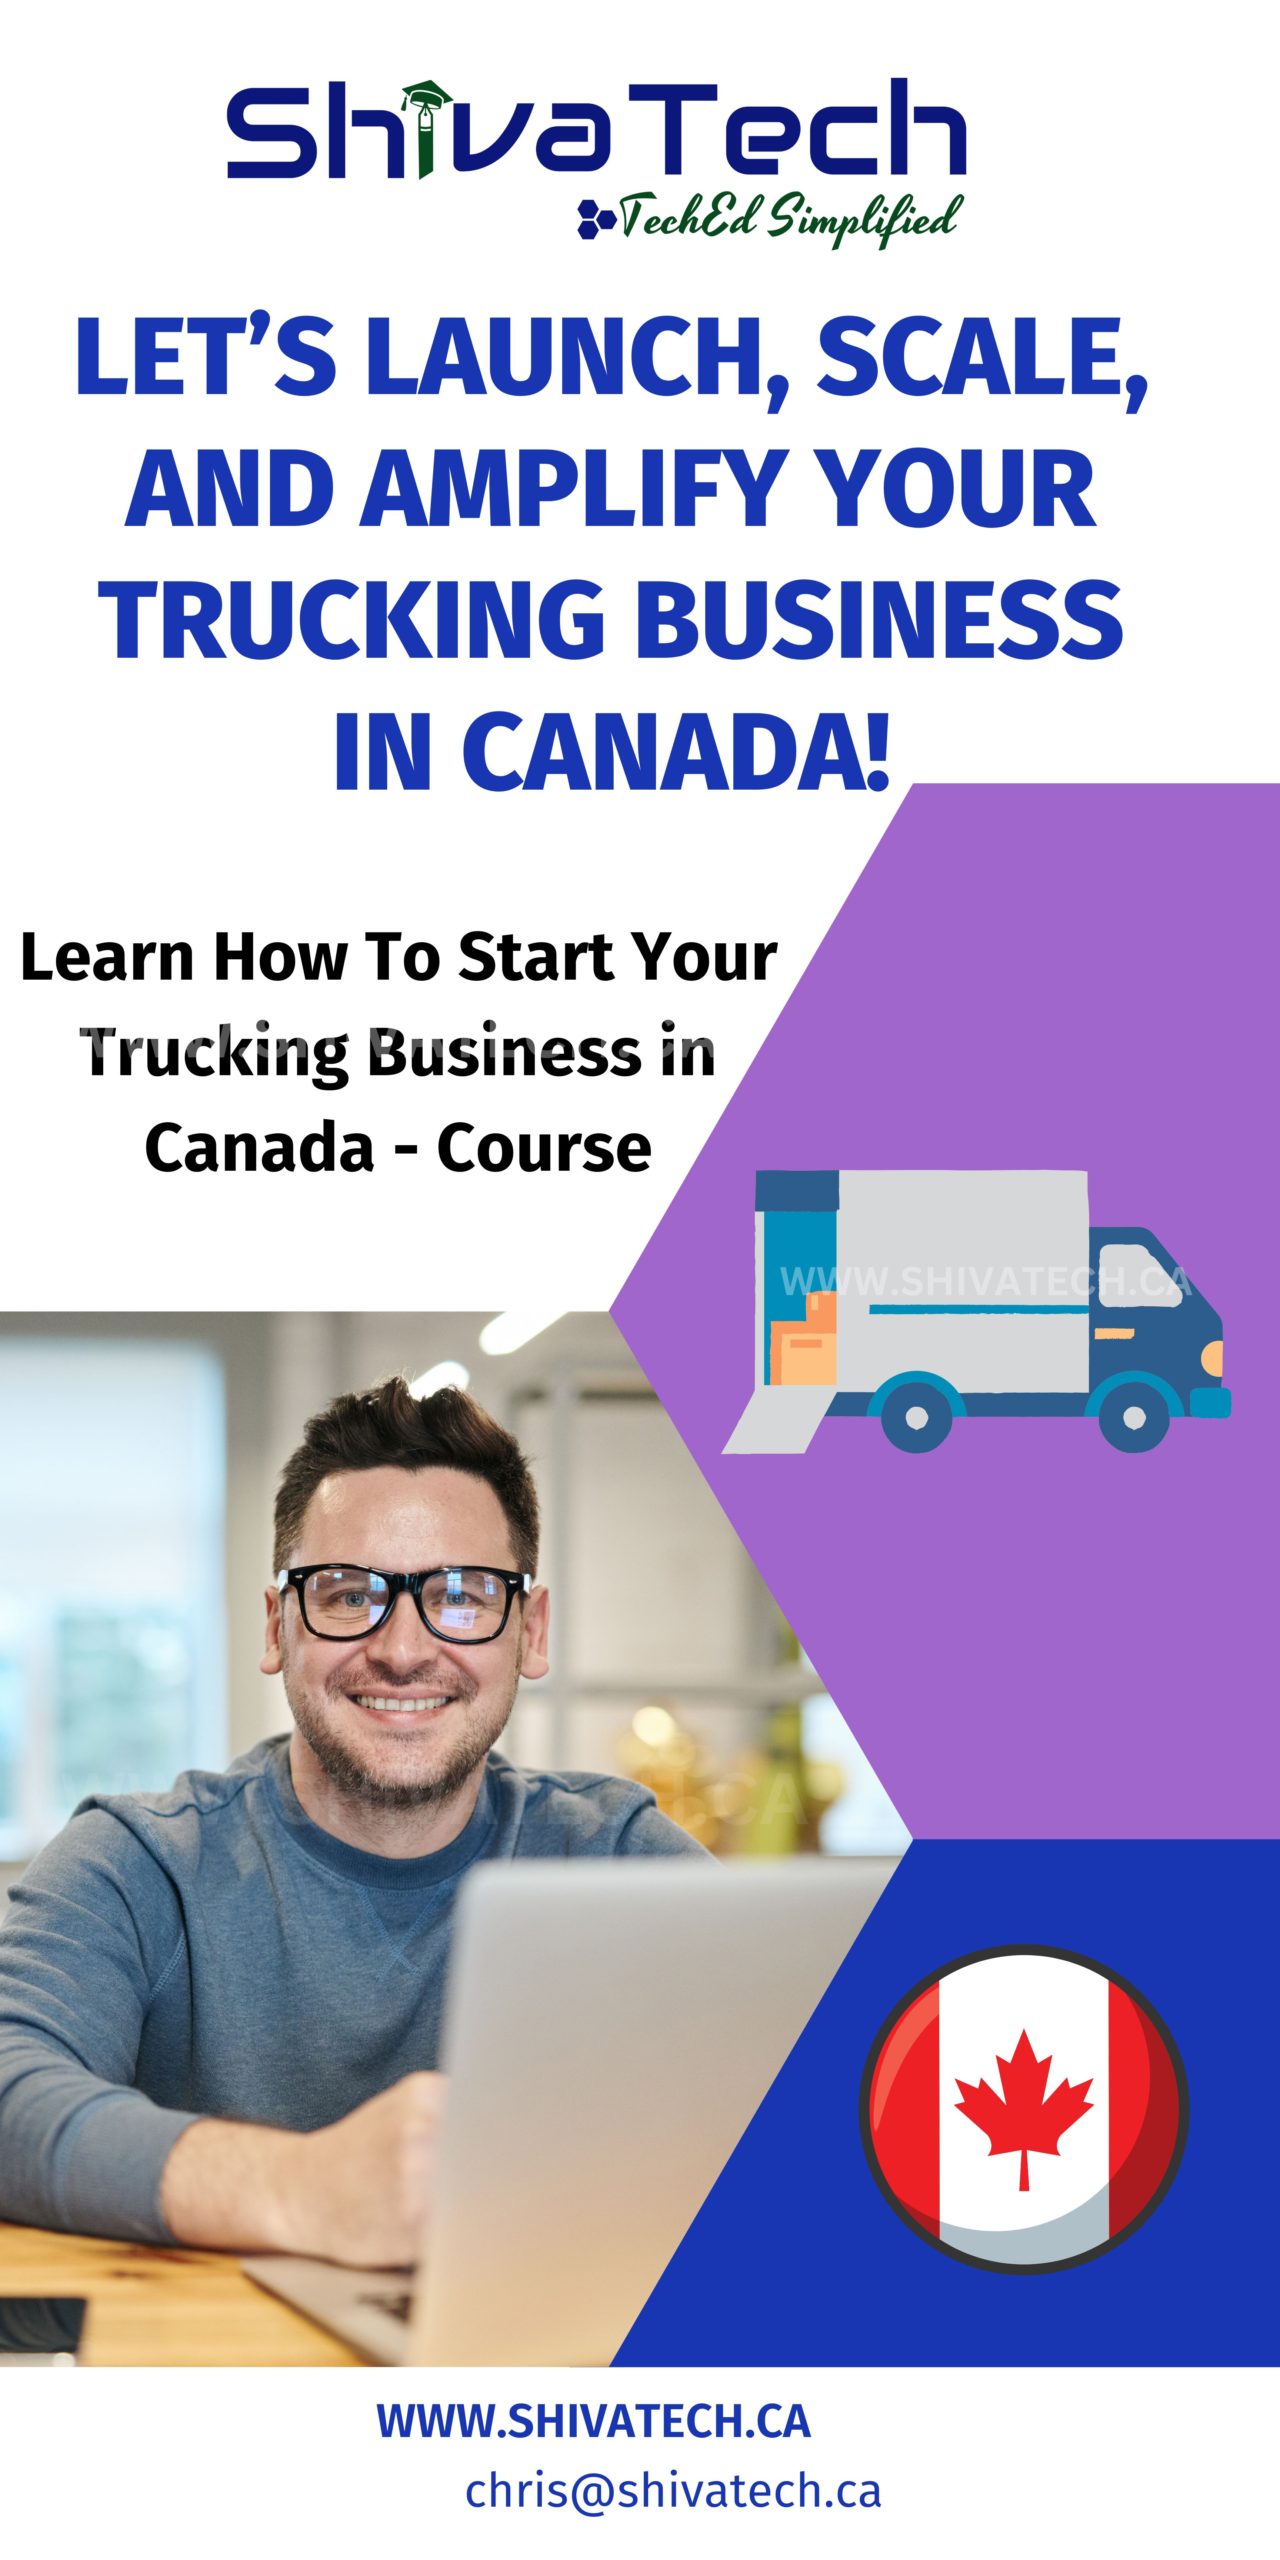 Learn How To Start Trucking Business In Canada from Bengal